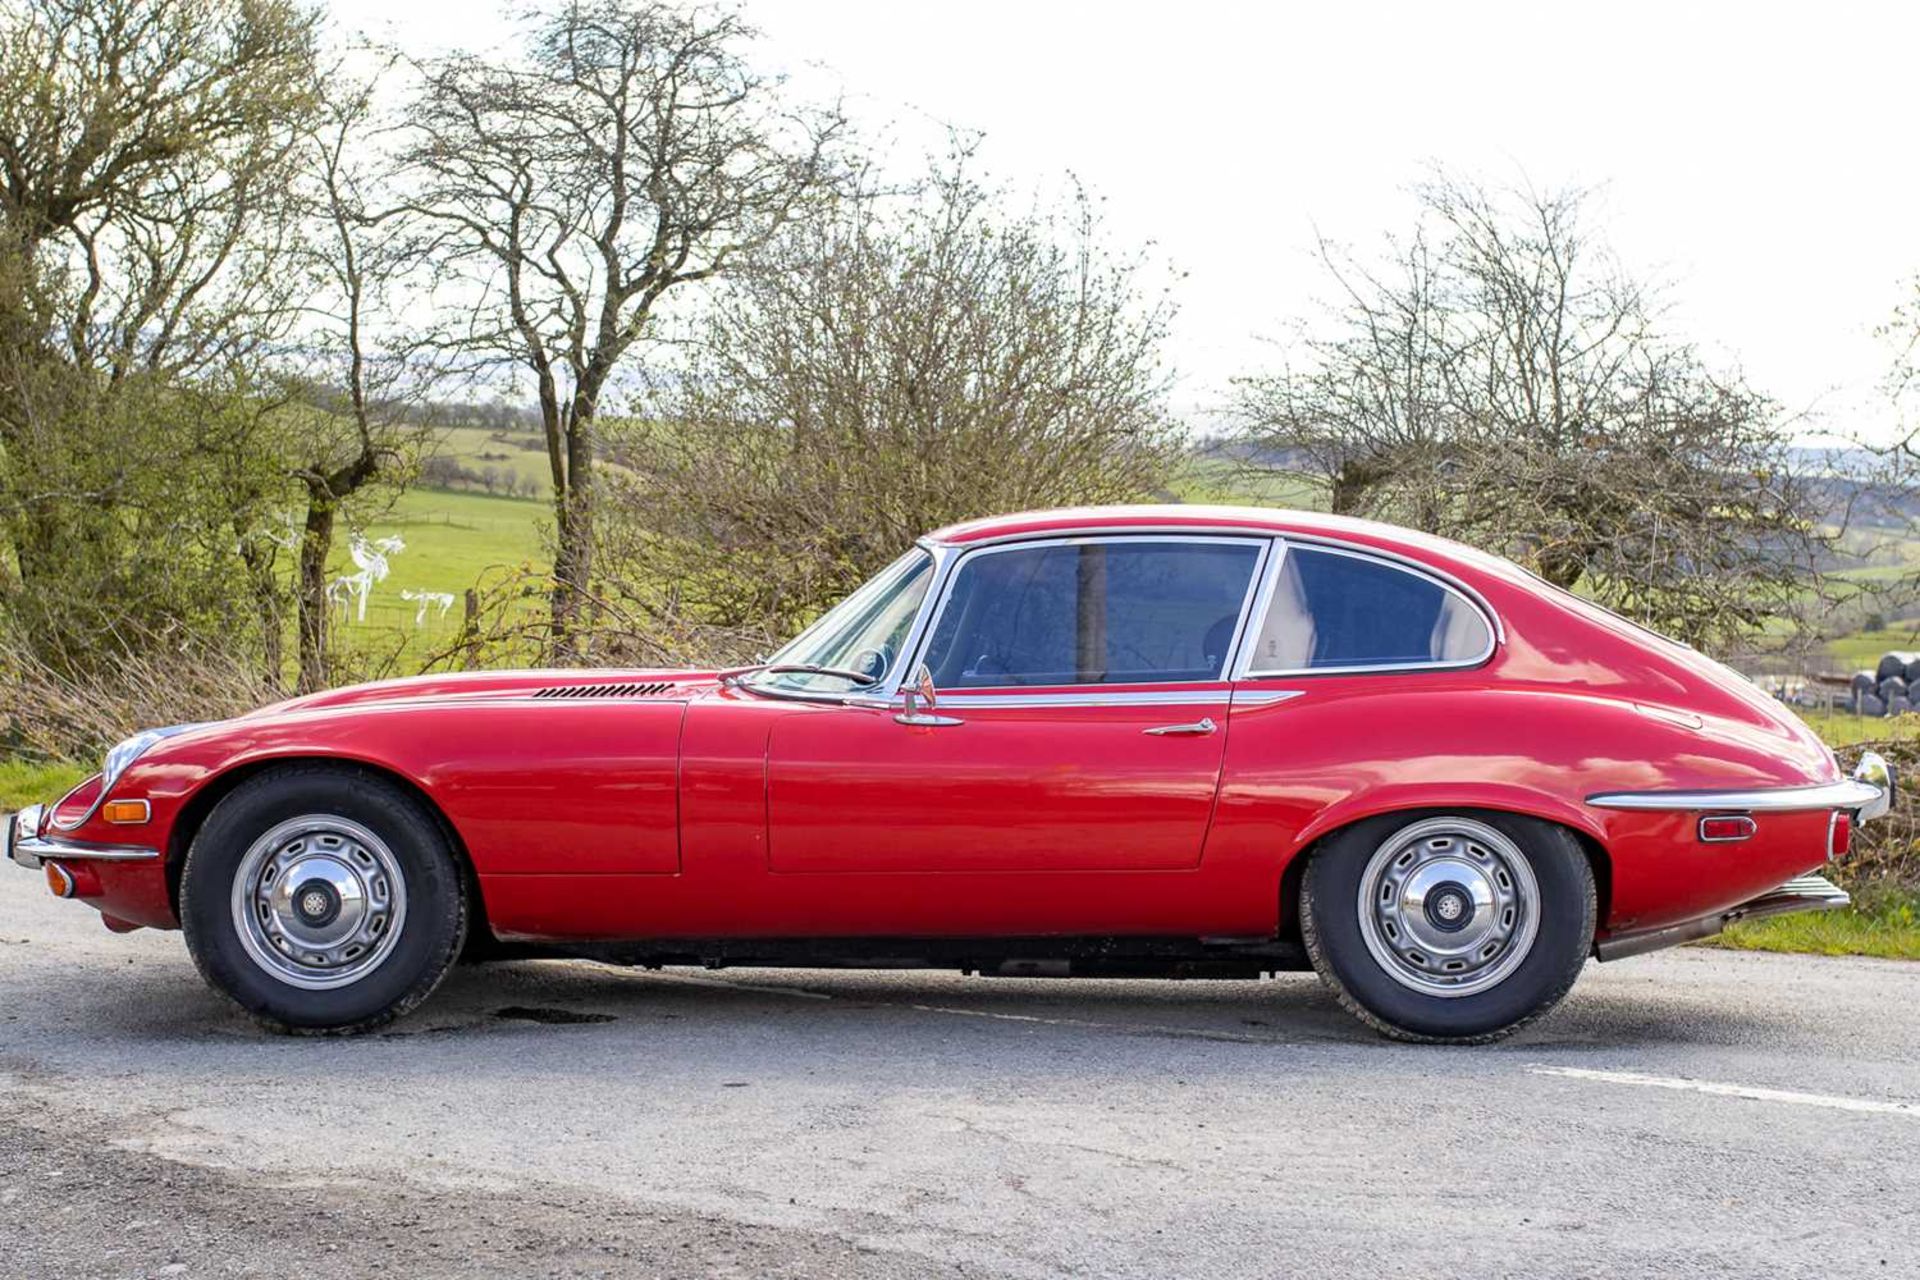 1973 Jaguar E-Type Coupe 5.3 V12 Three owners from new - Image 11 of 79